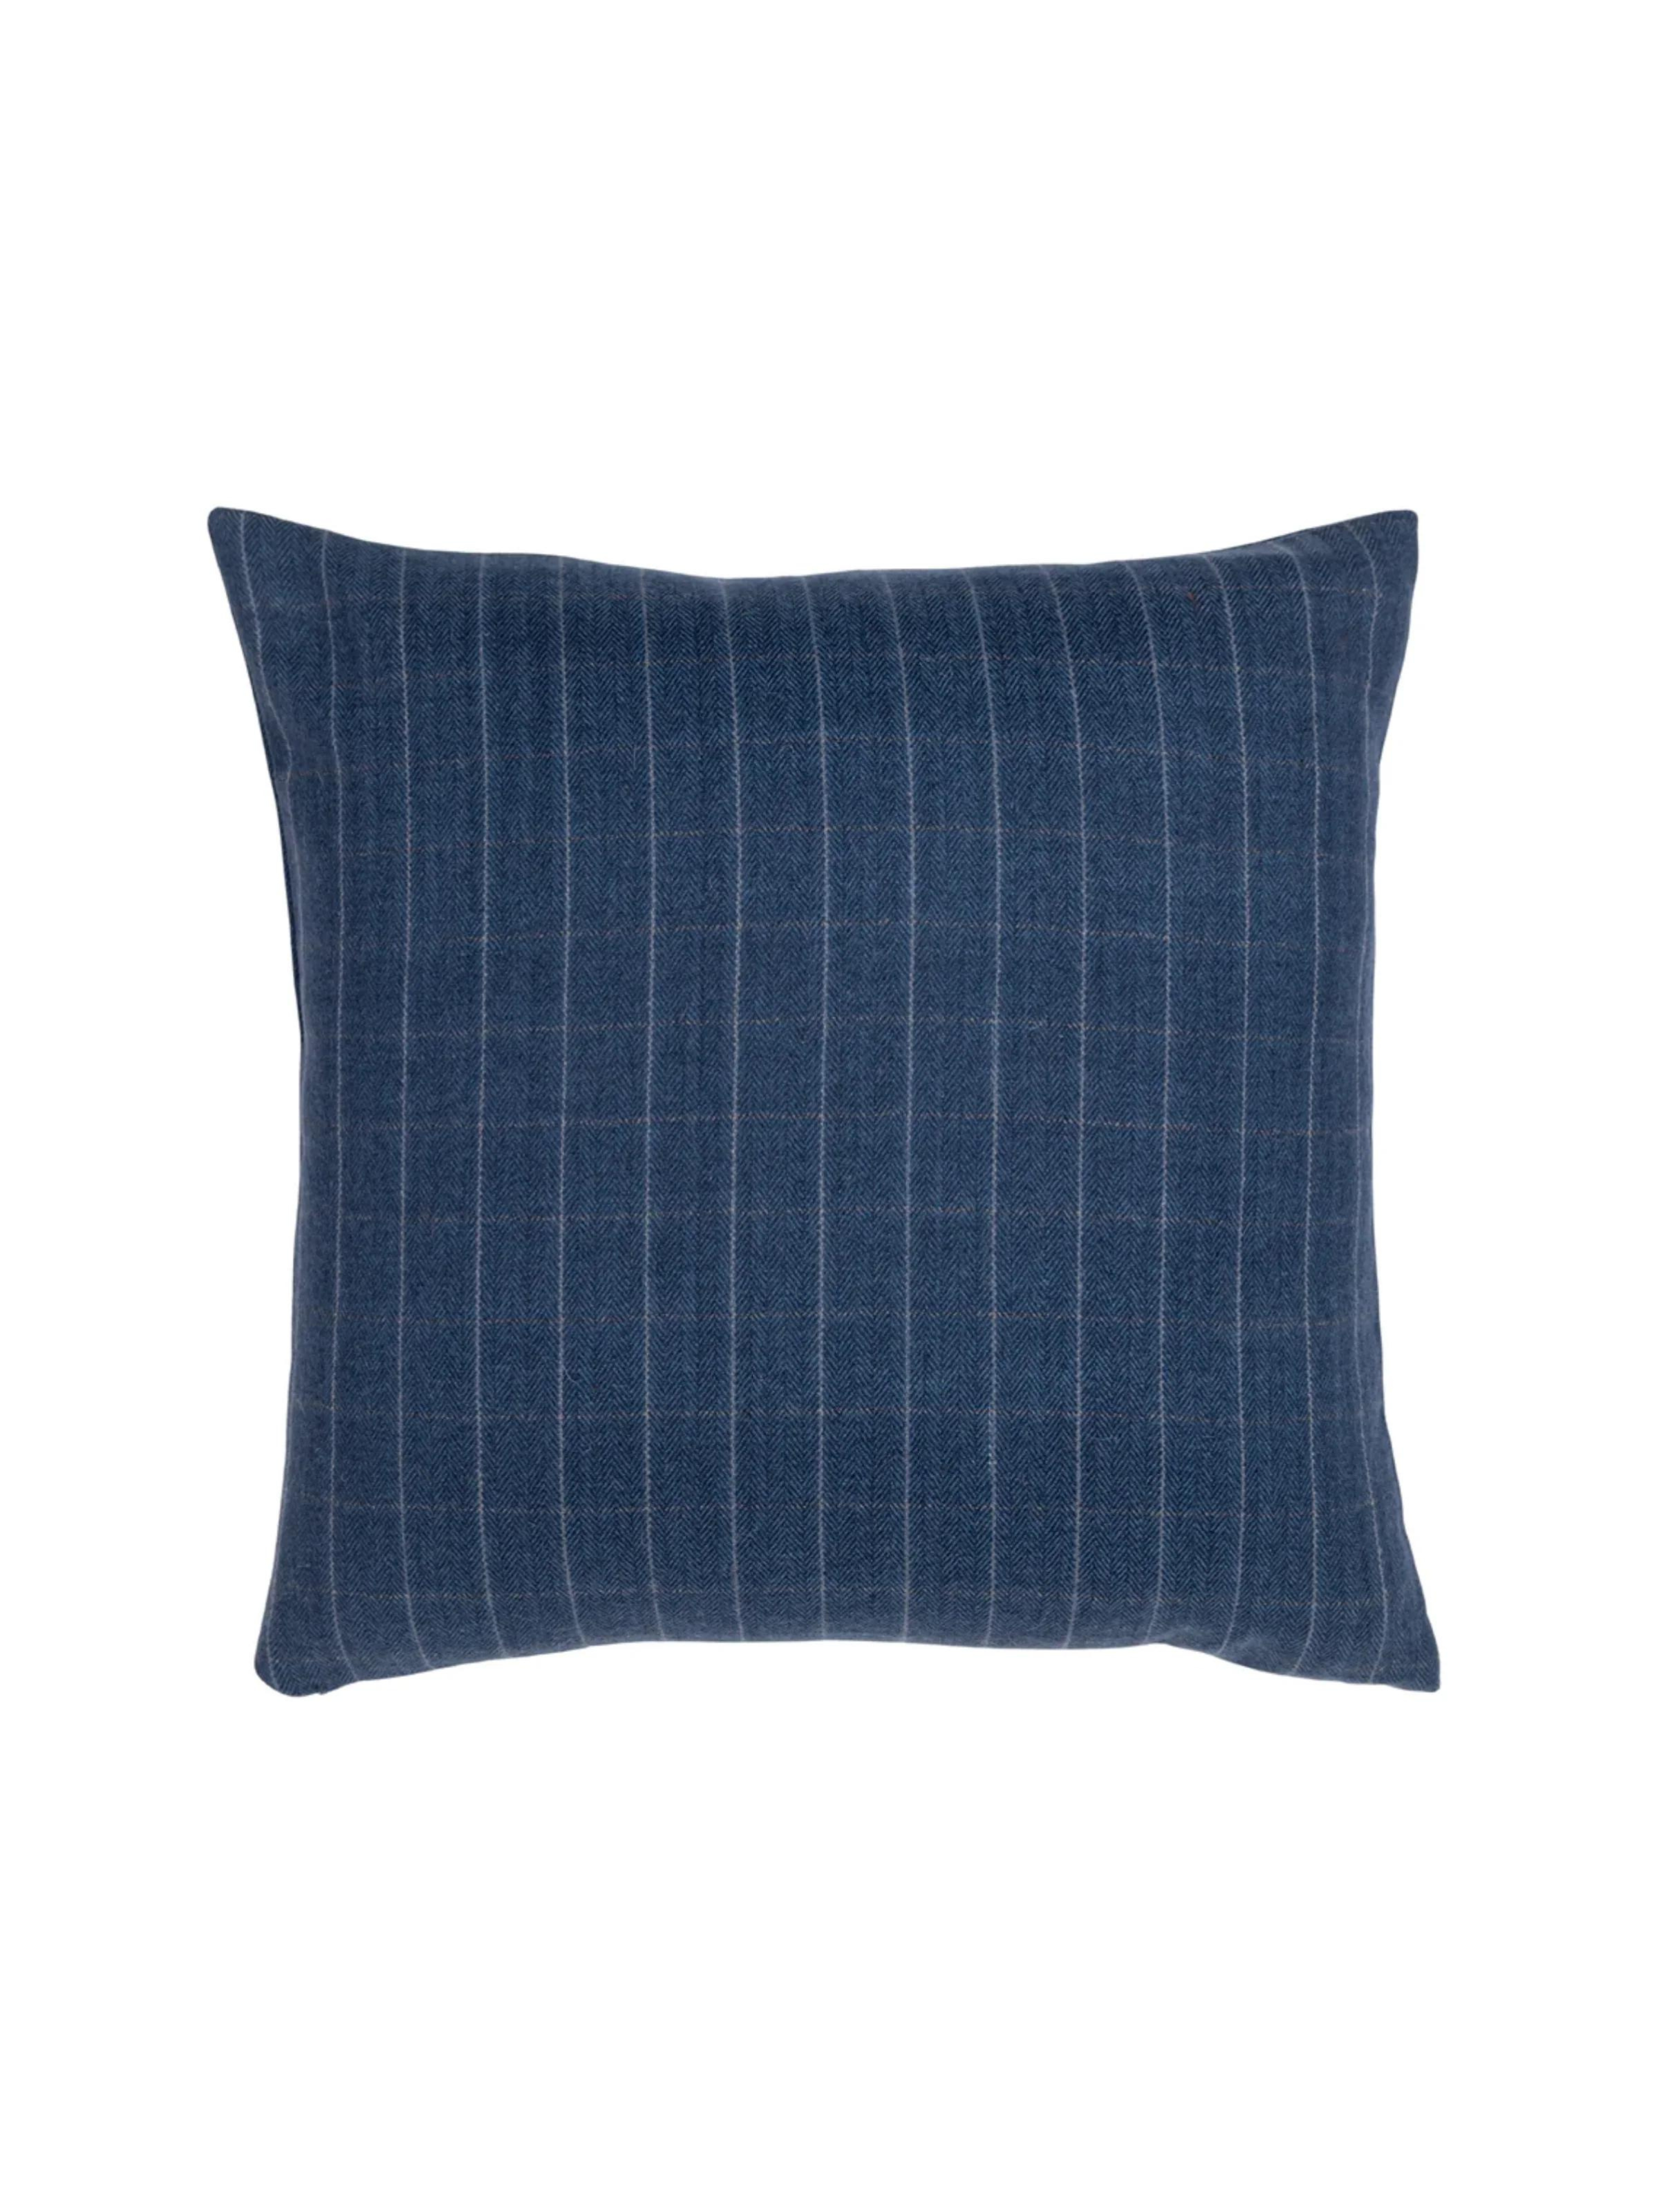 Highlands Navy Squares Wool Pillow